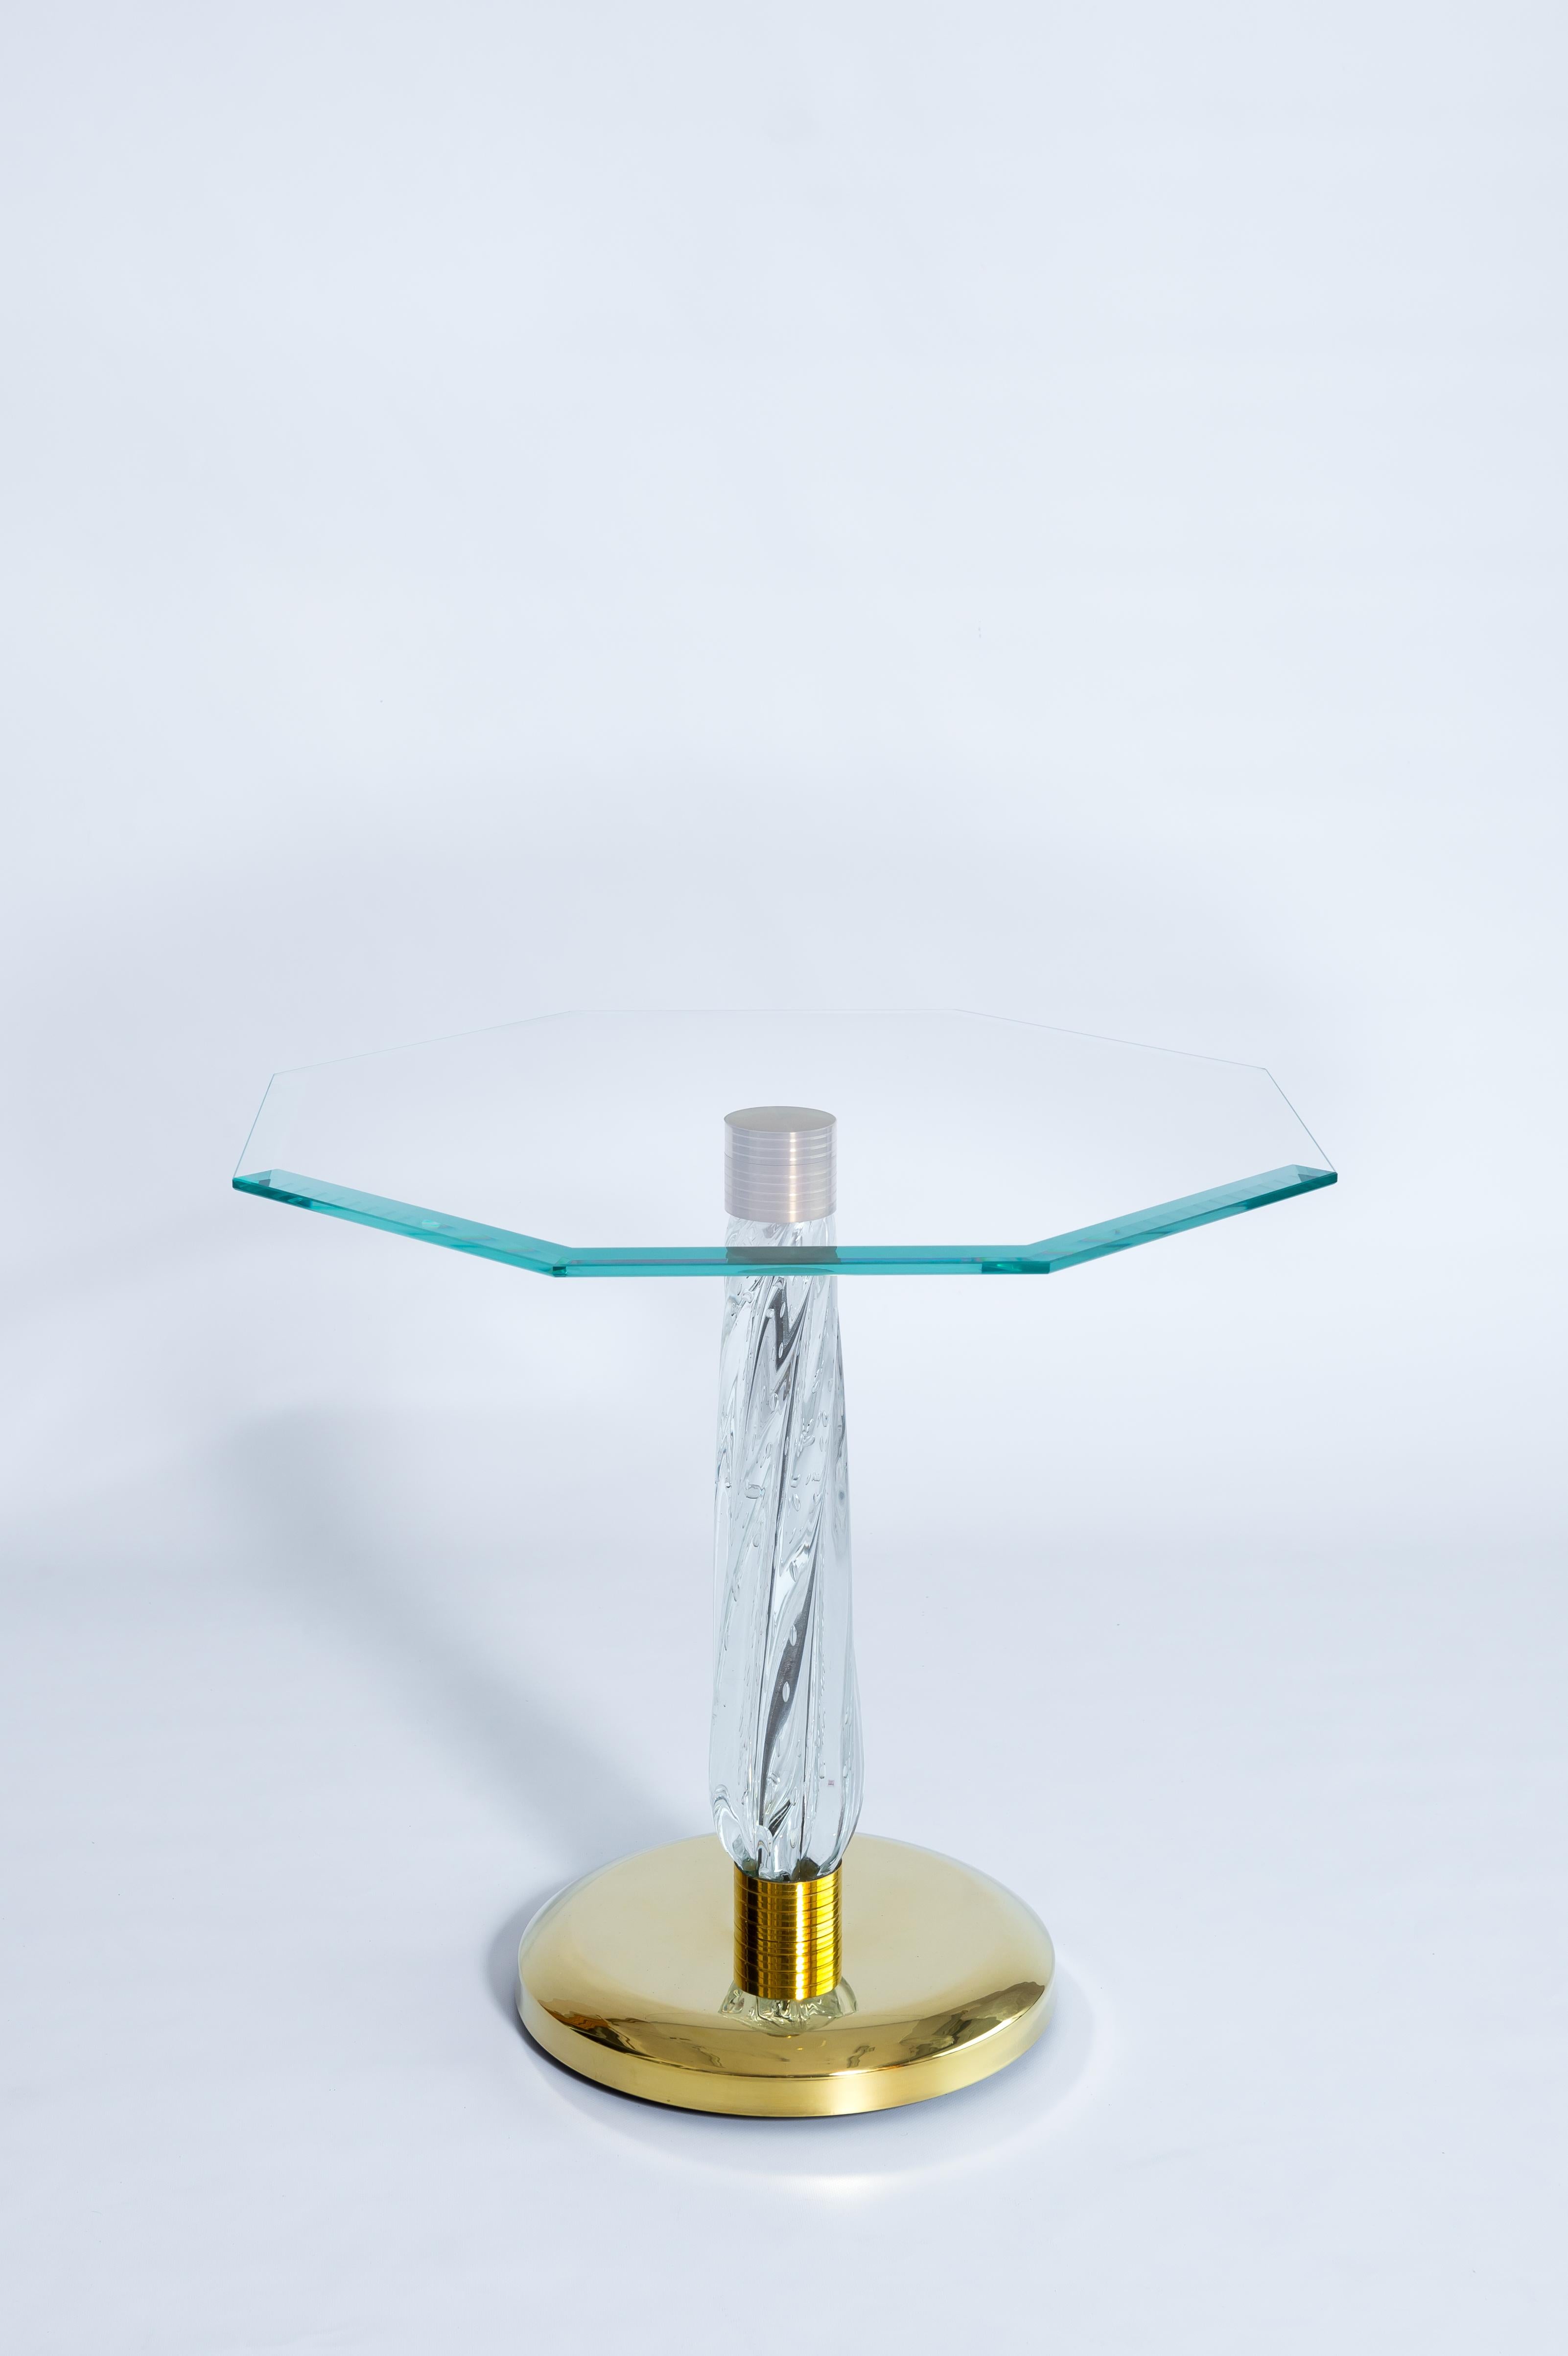 Italian Gorgeous Venetian Cocktail Table in Murano Glass with Bronze Base, 21st Century For Sale